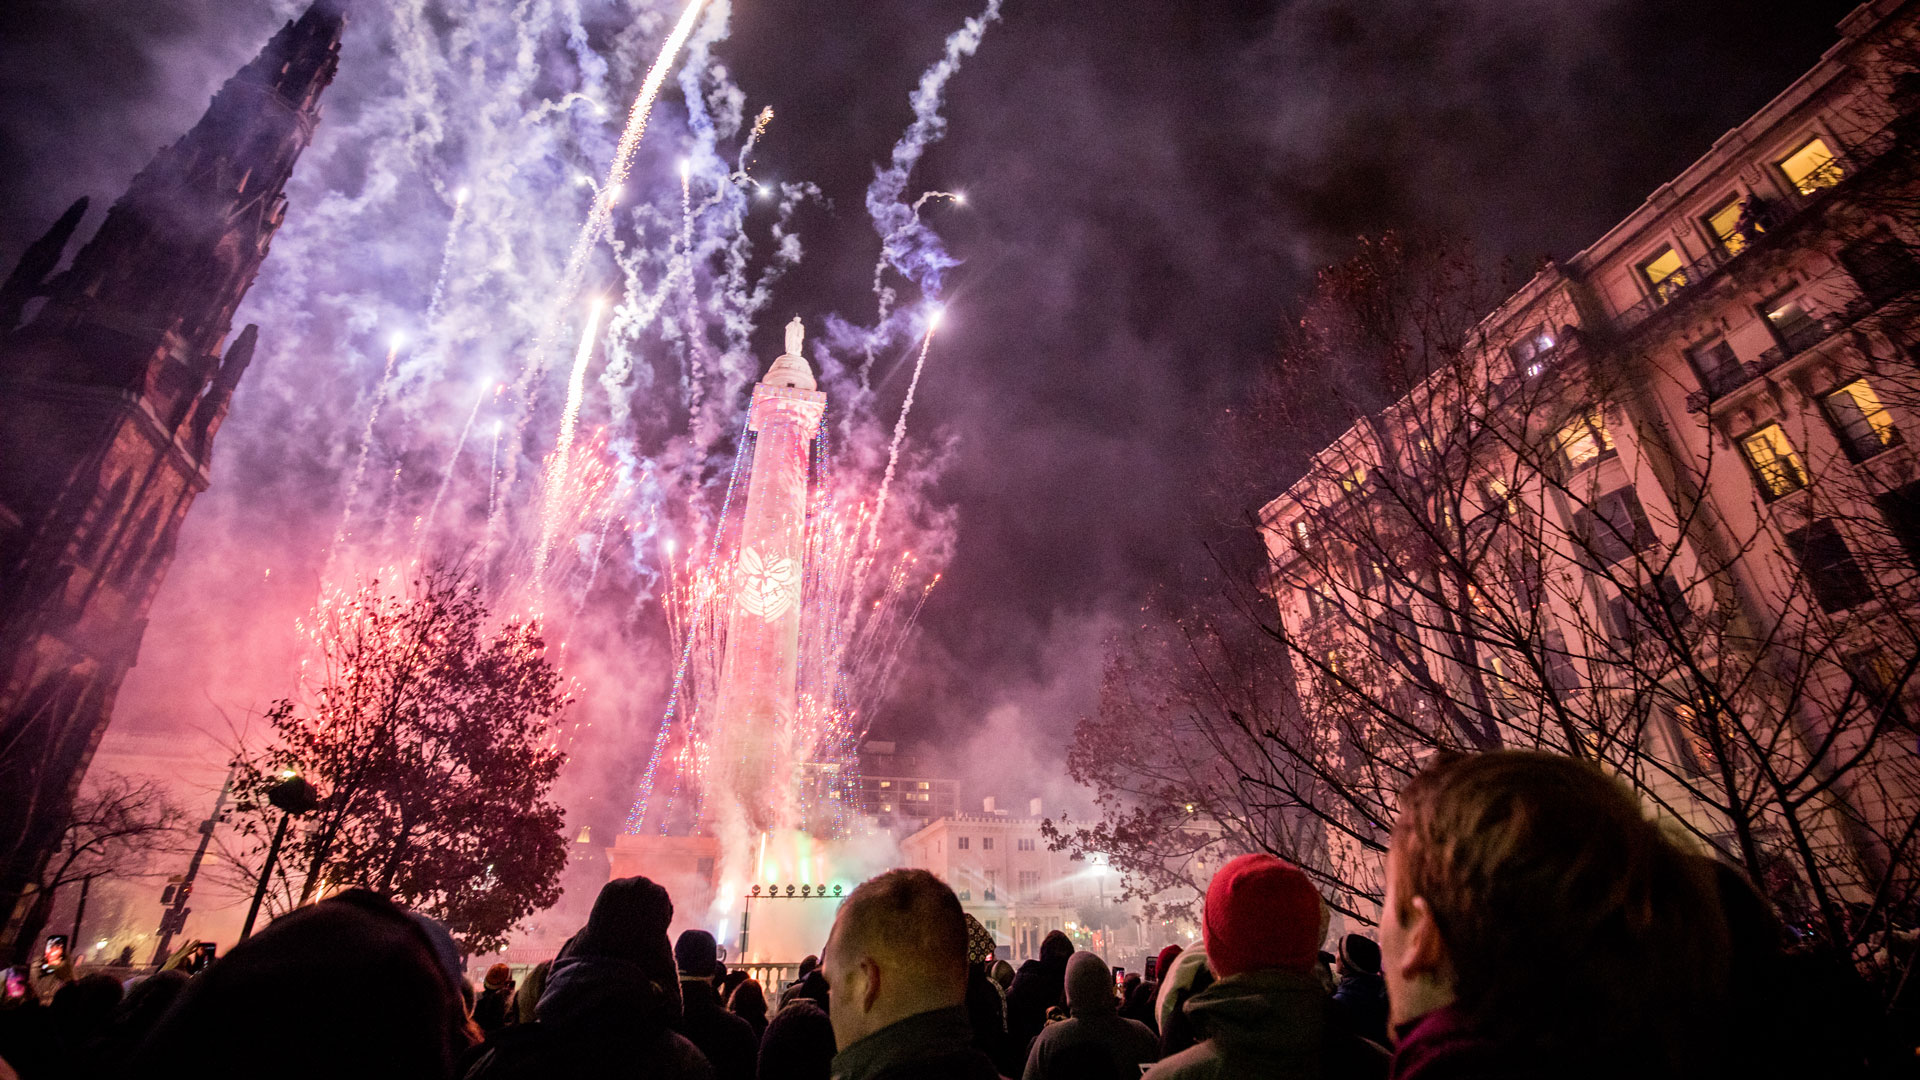 Fireworks during the Annual Monument Lighting holiday celebration in the Mt. Vernon neighborhood of Downtown Baltimore.